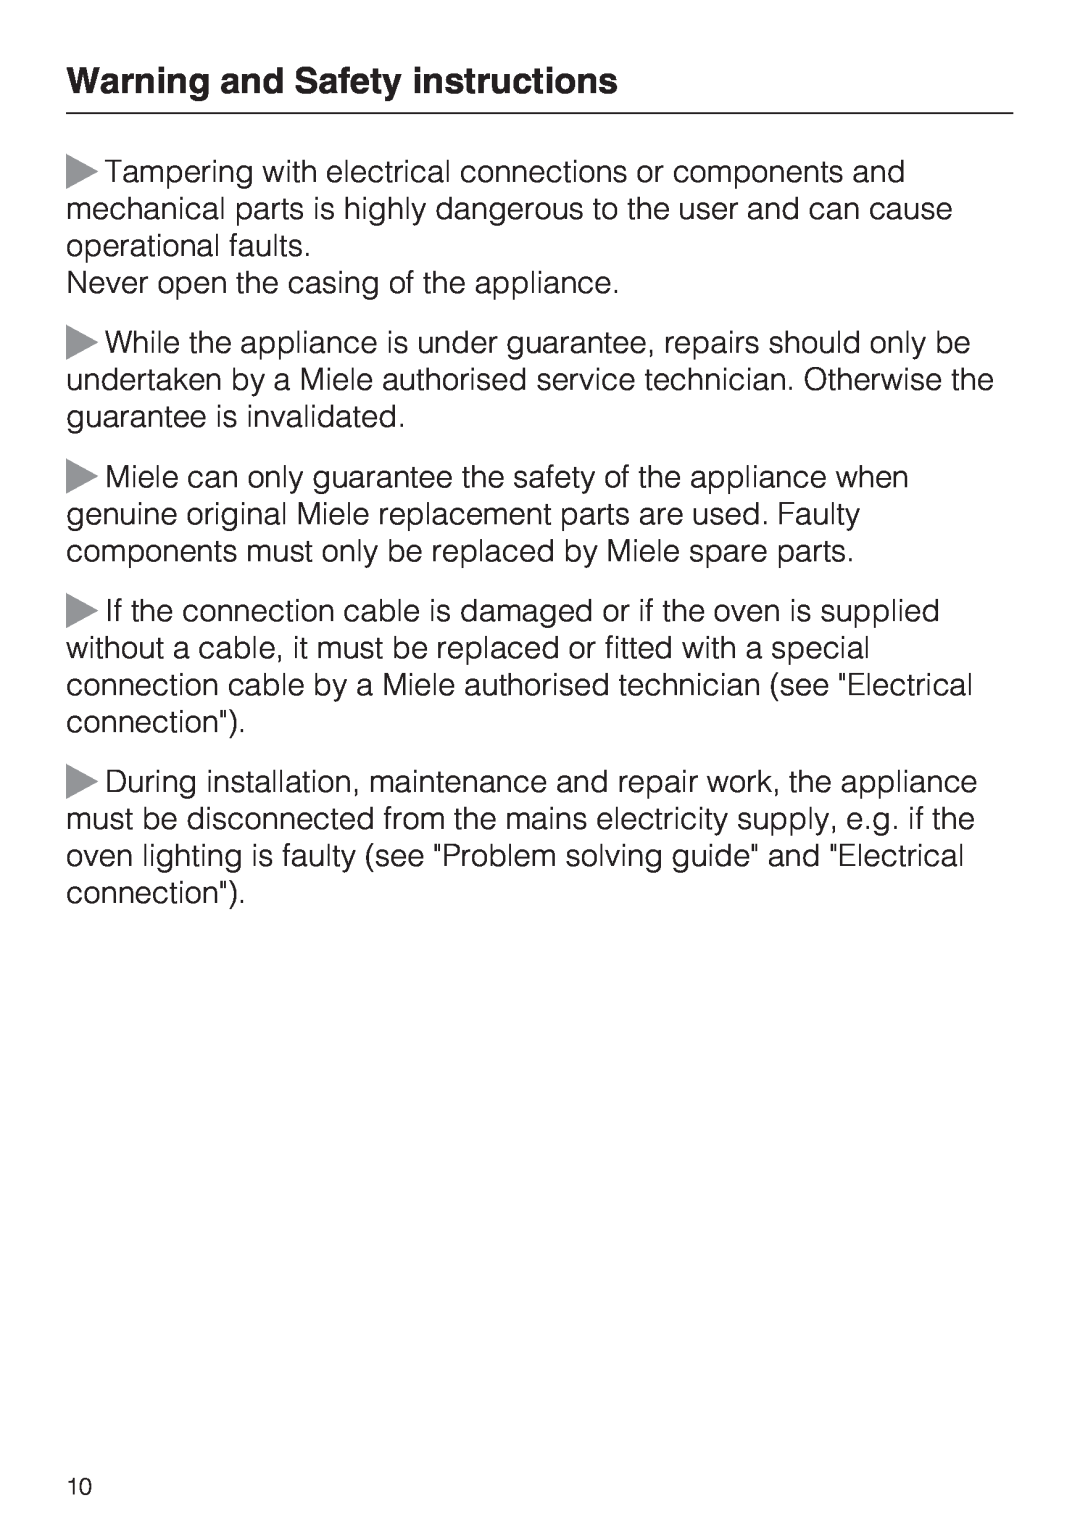 Miele 10 102 470 installation instructions Warning and Safety instructions, Never open the casing of the appliance 